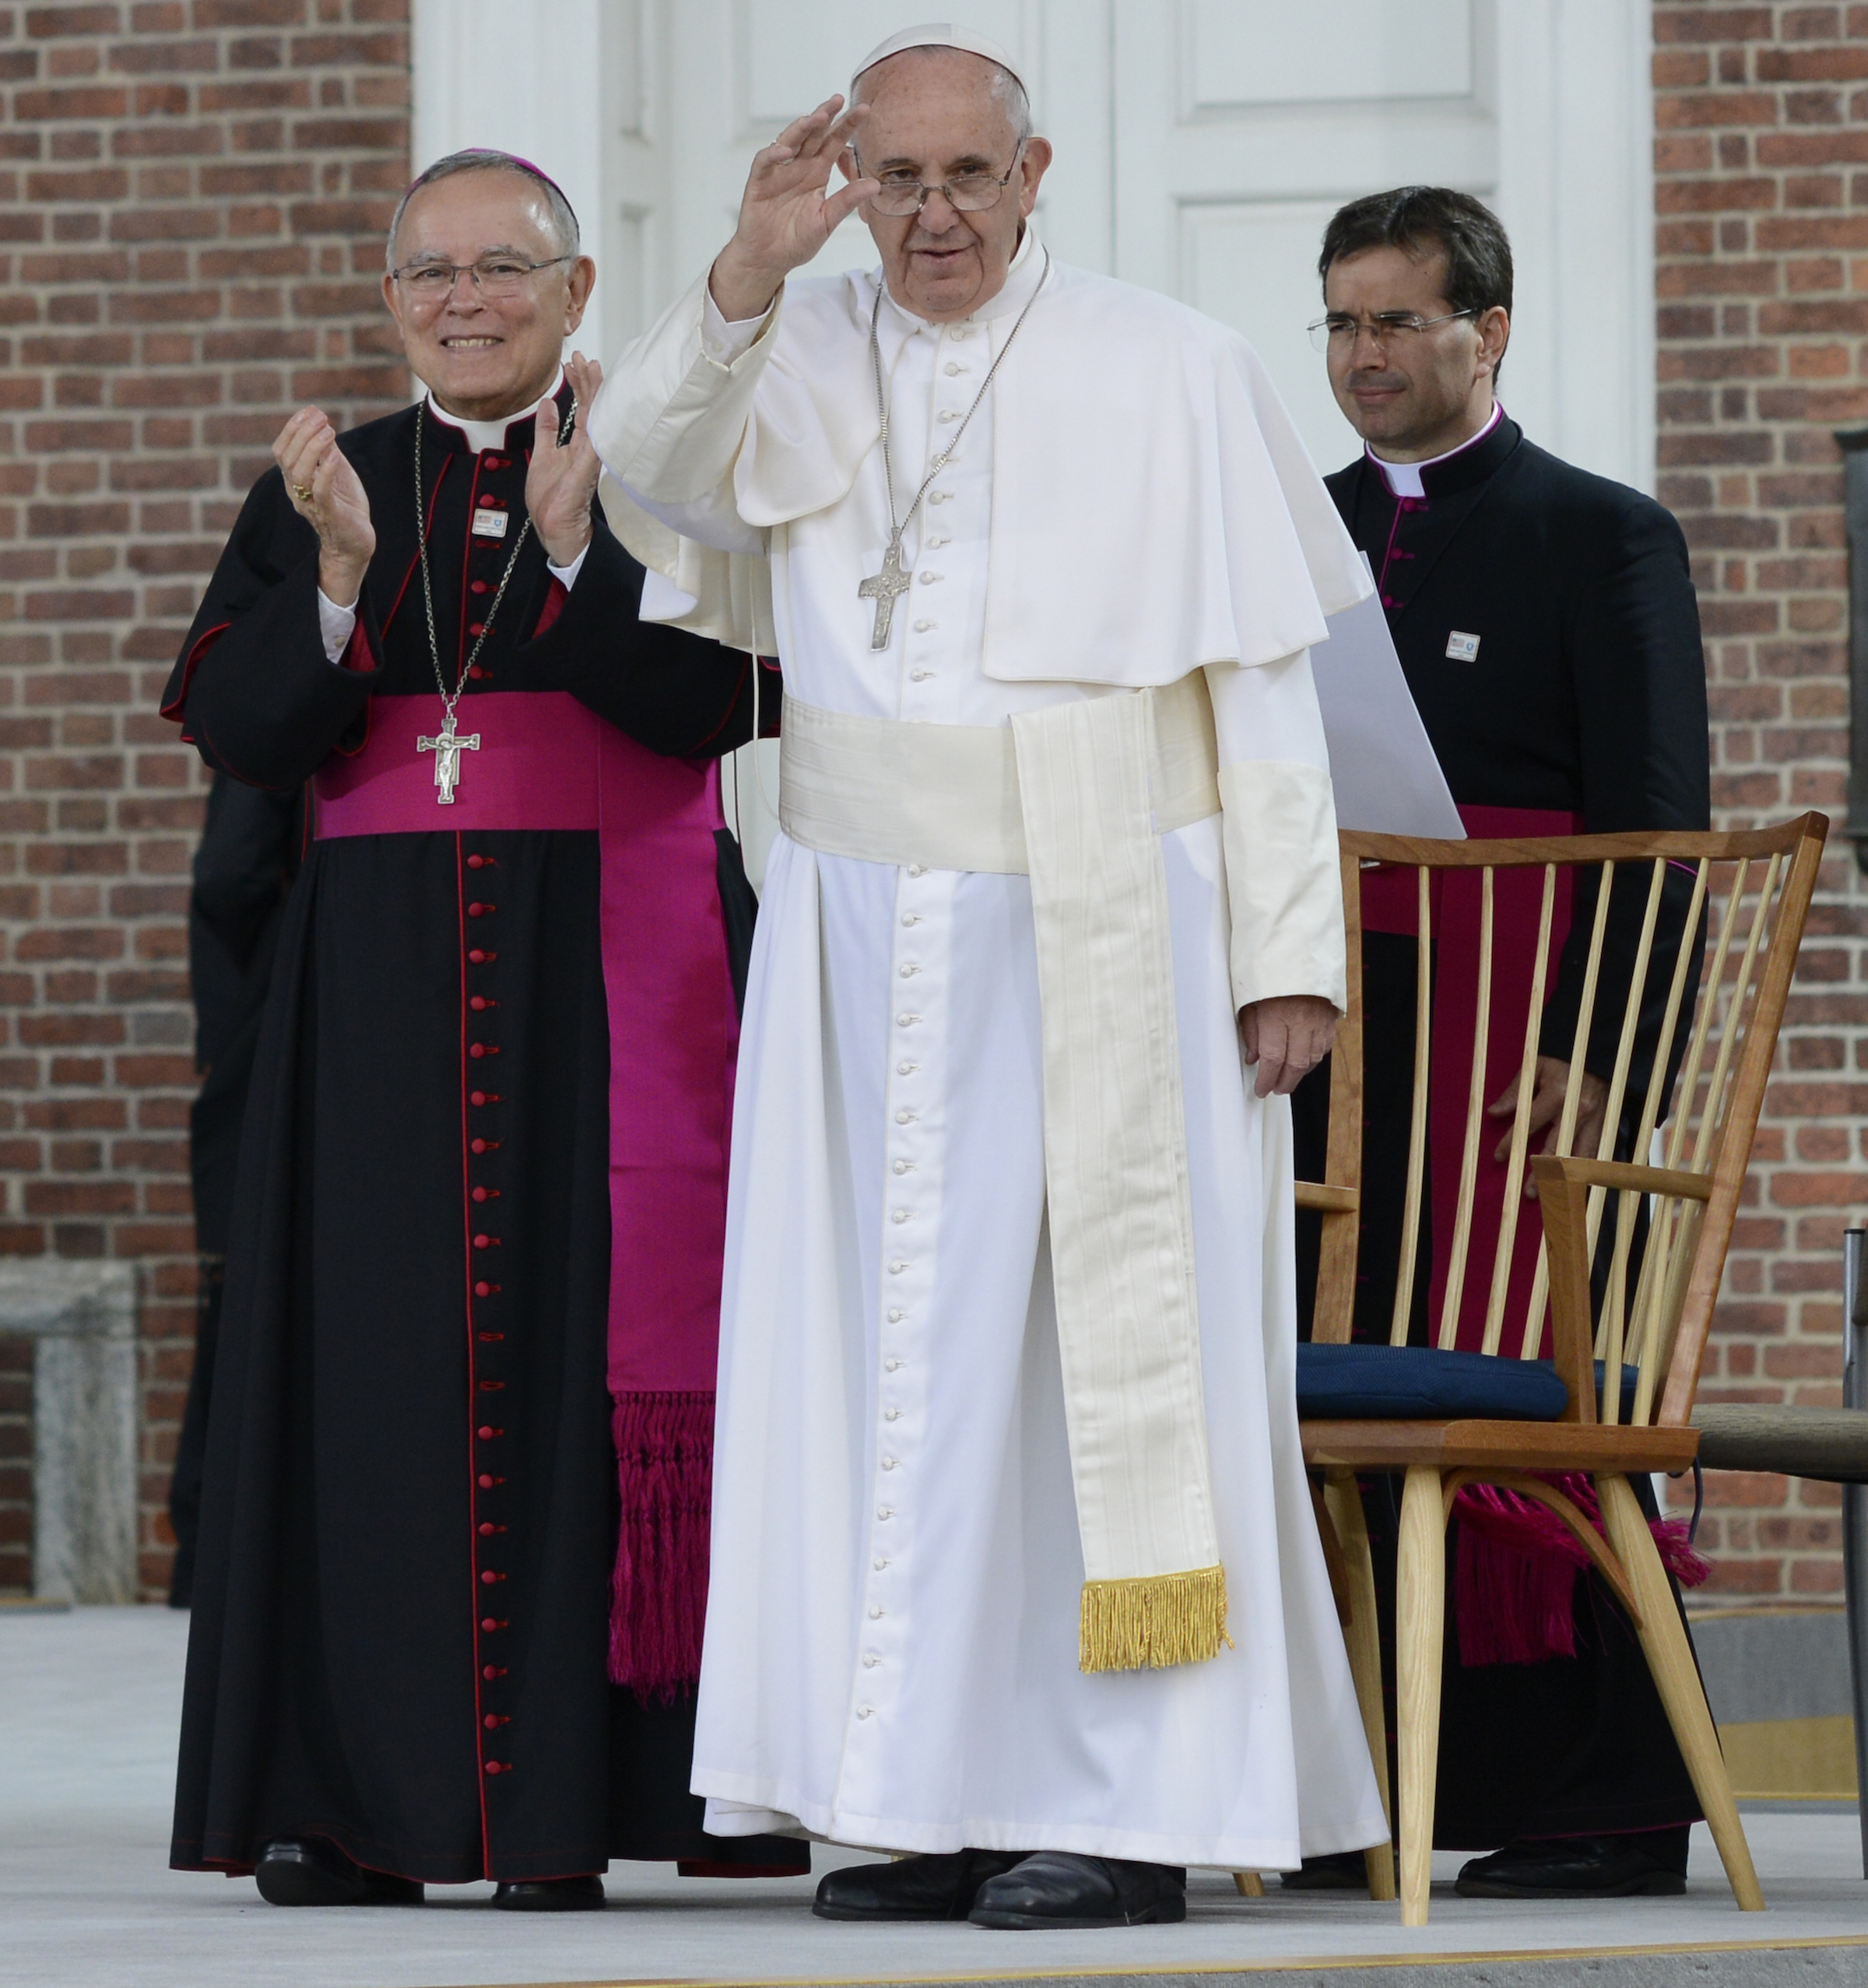 Pope Francis waves to the crowd at Independence Hall in Philadelphia, Saturday, Sept. 26, 2015. The pontiff discussed immigration during his address. (U.S. Coast Guard photo by Chief Petty Officer Nick Ameen)